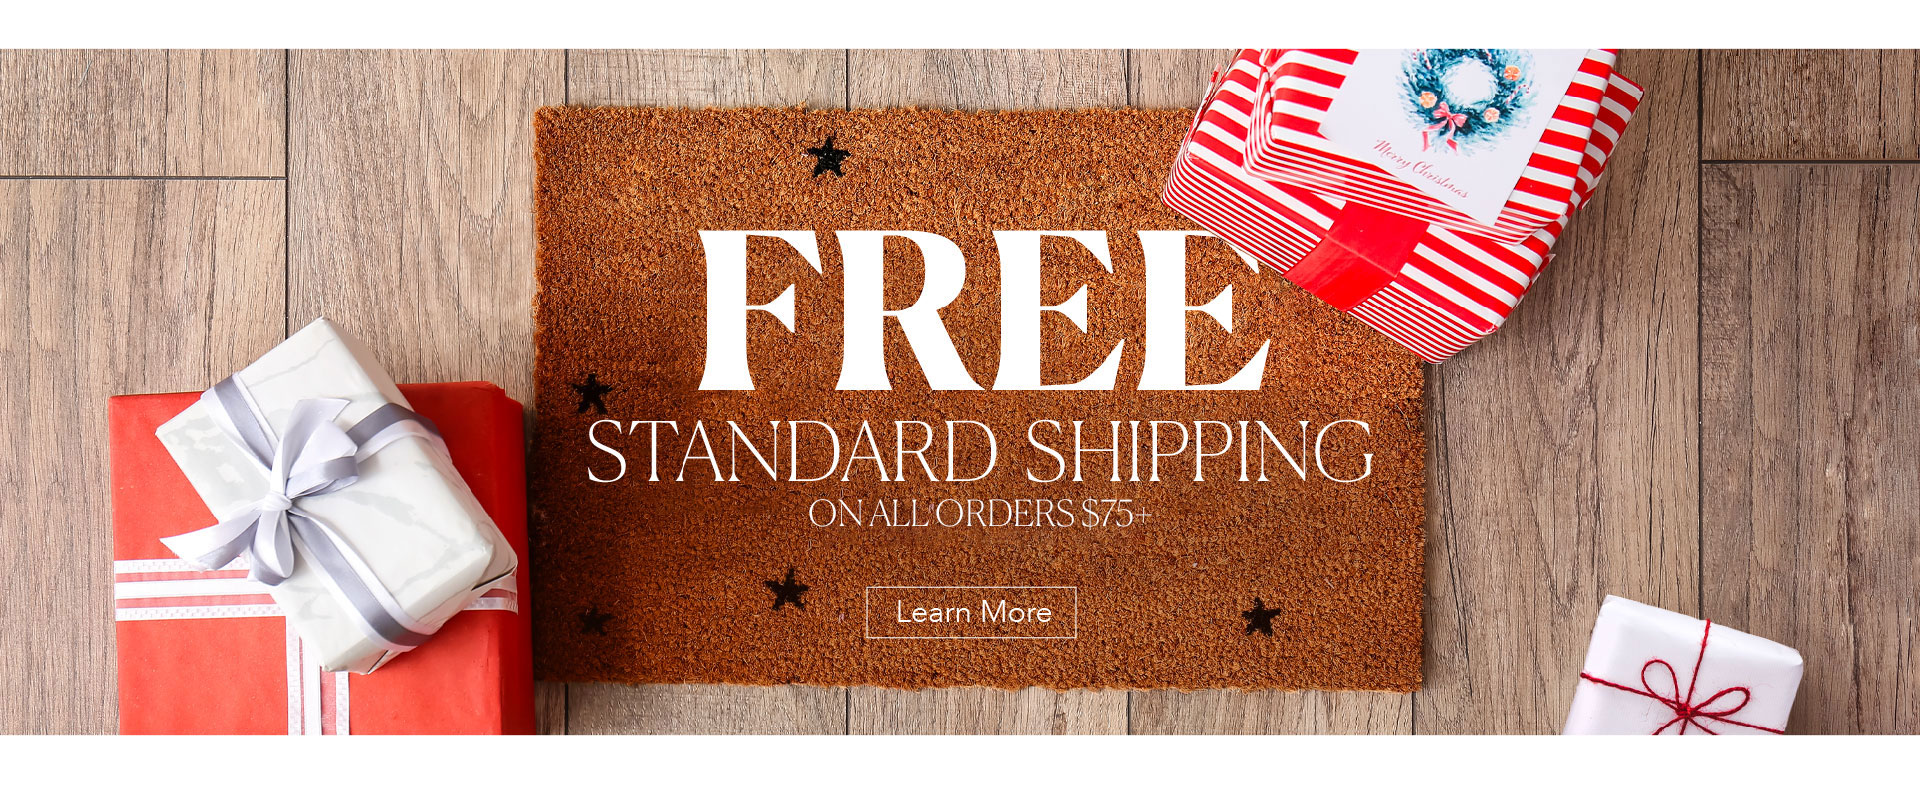 Free Standard shipping on all orders - NO MINIMUM!